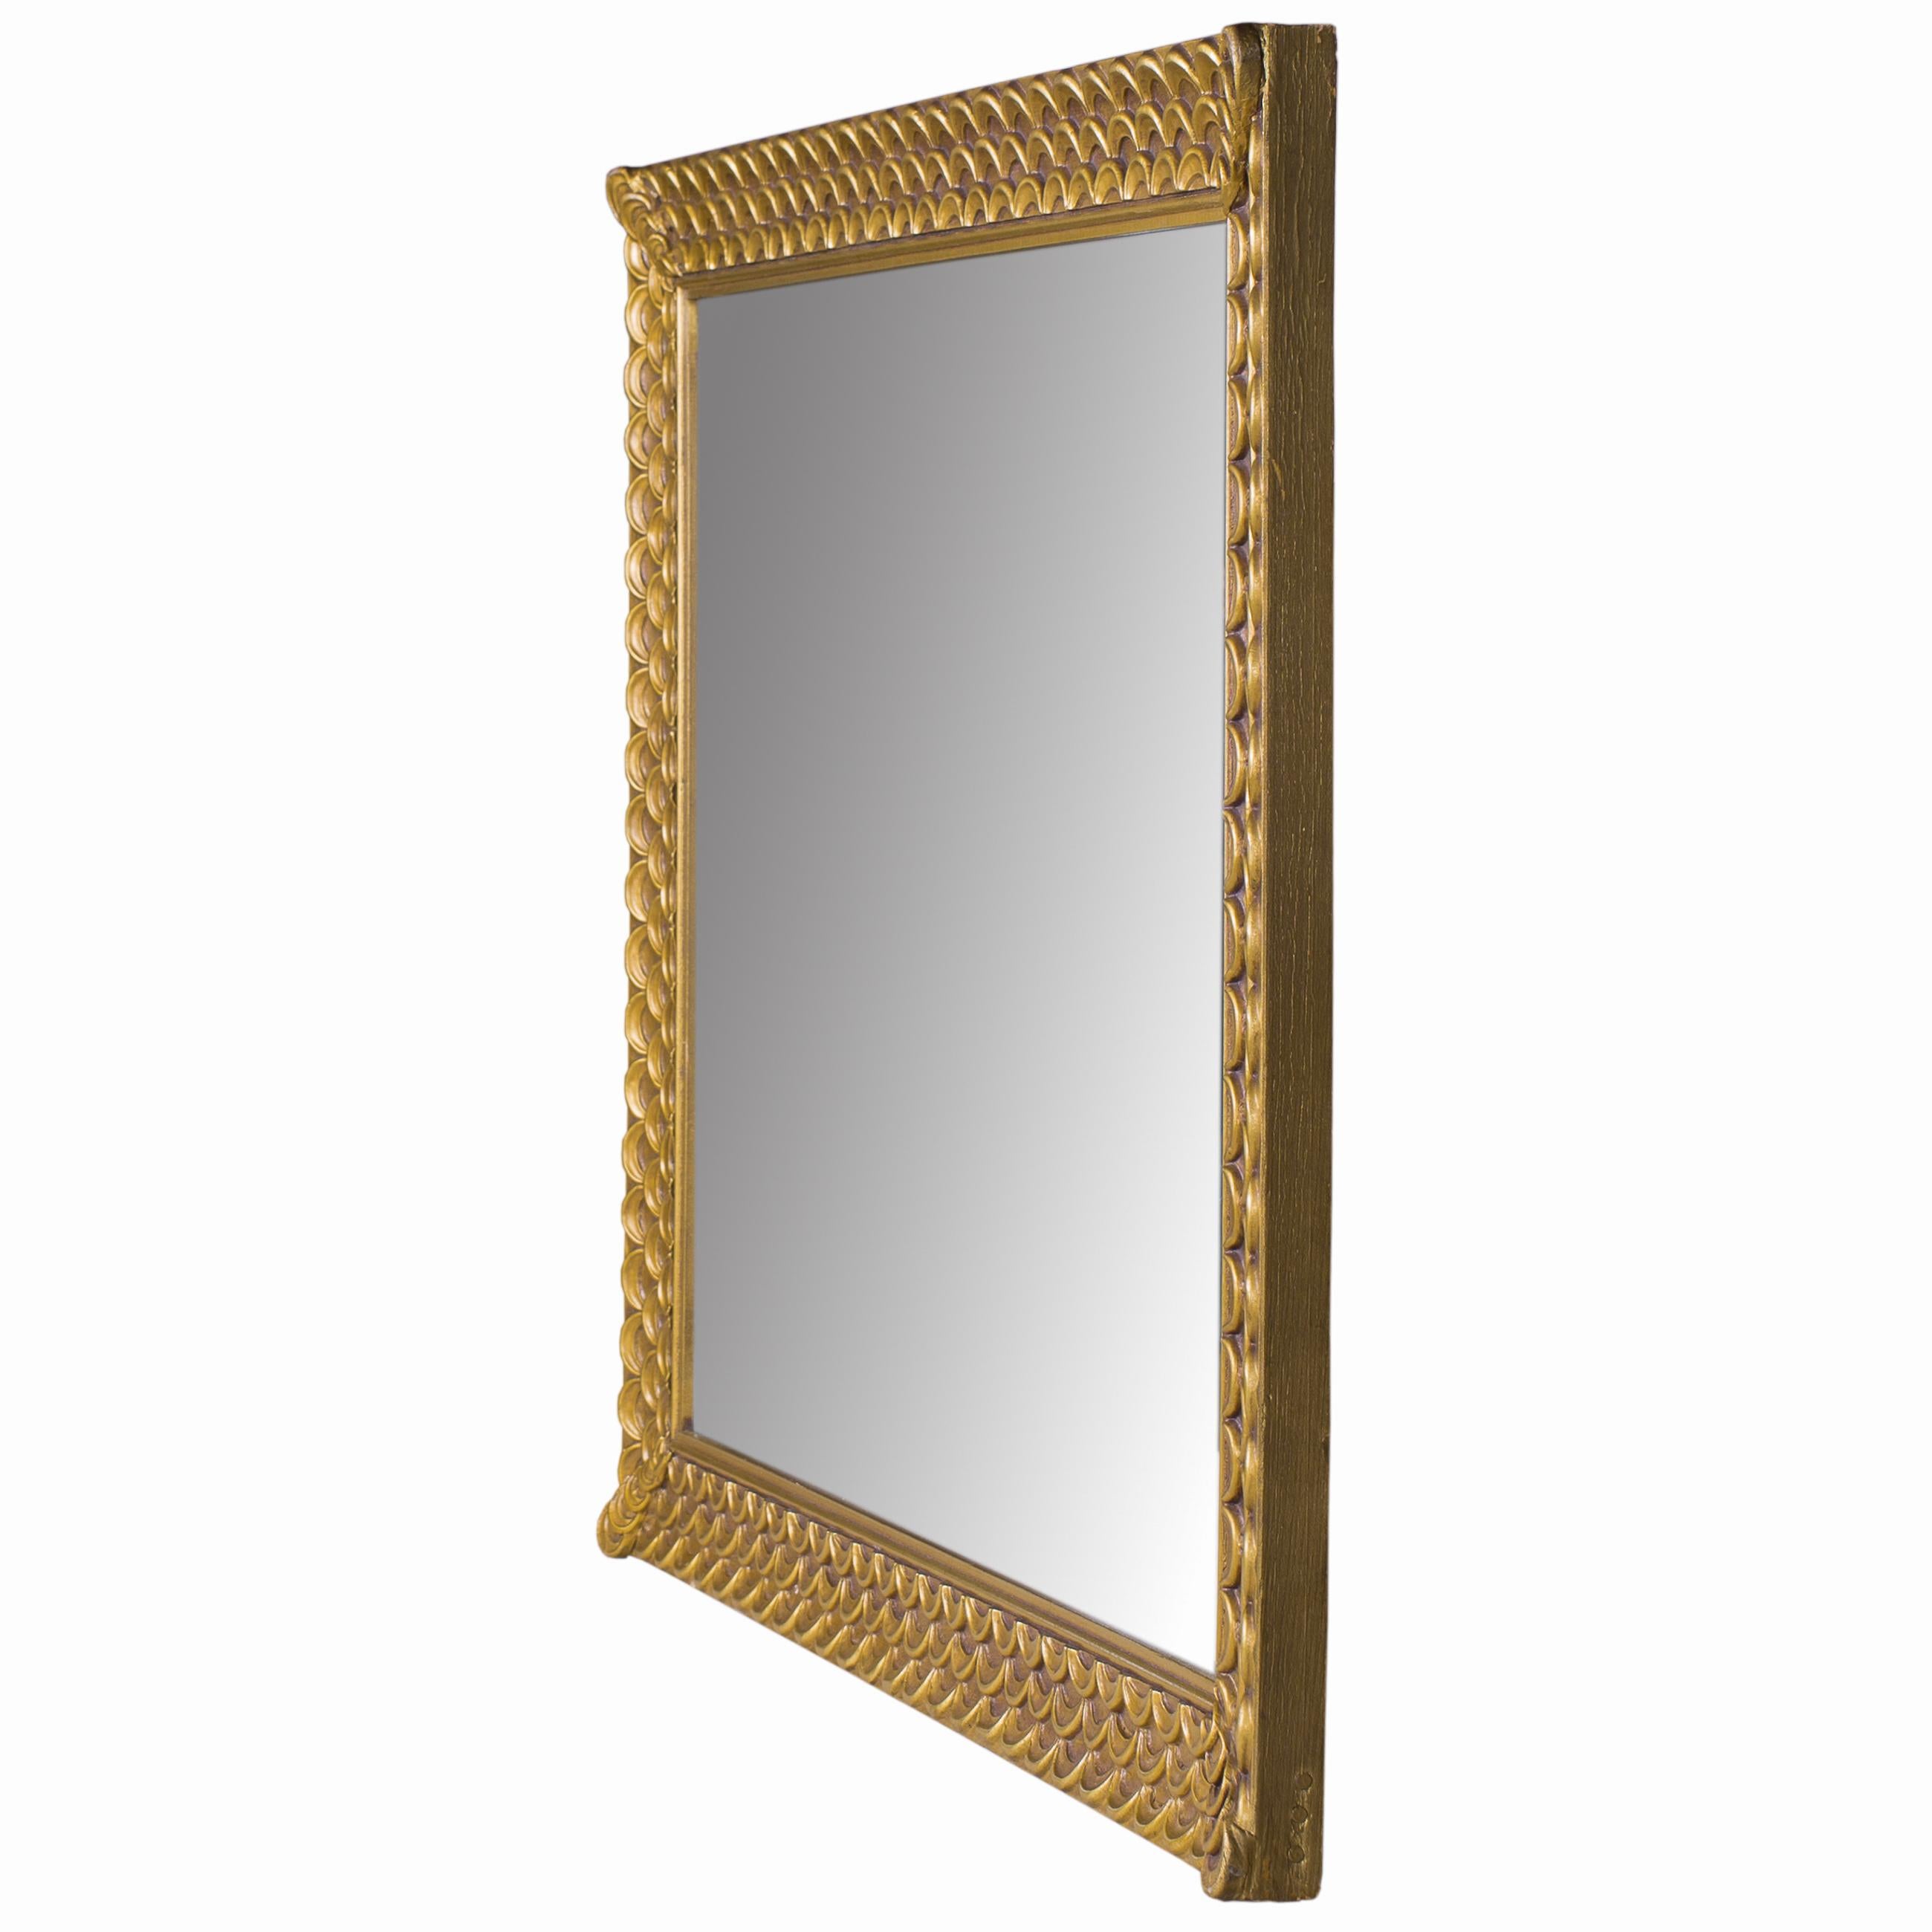 Hollywood Regency Large Scalloped Giltwood Gold Mirror, 1940s